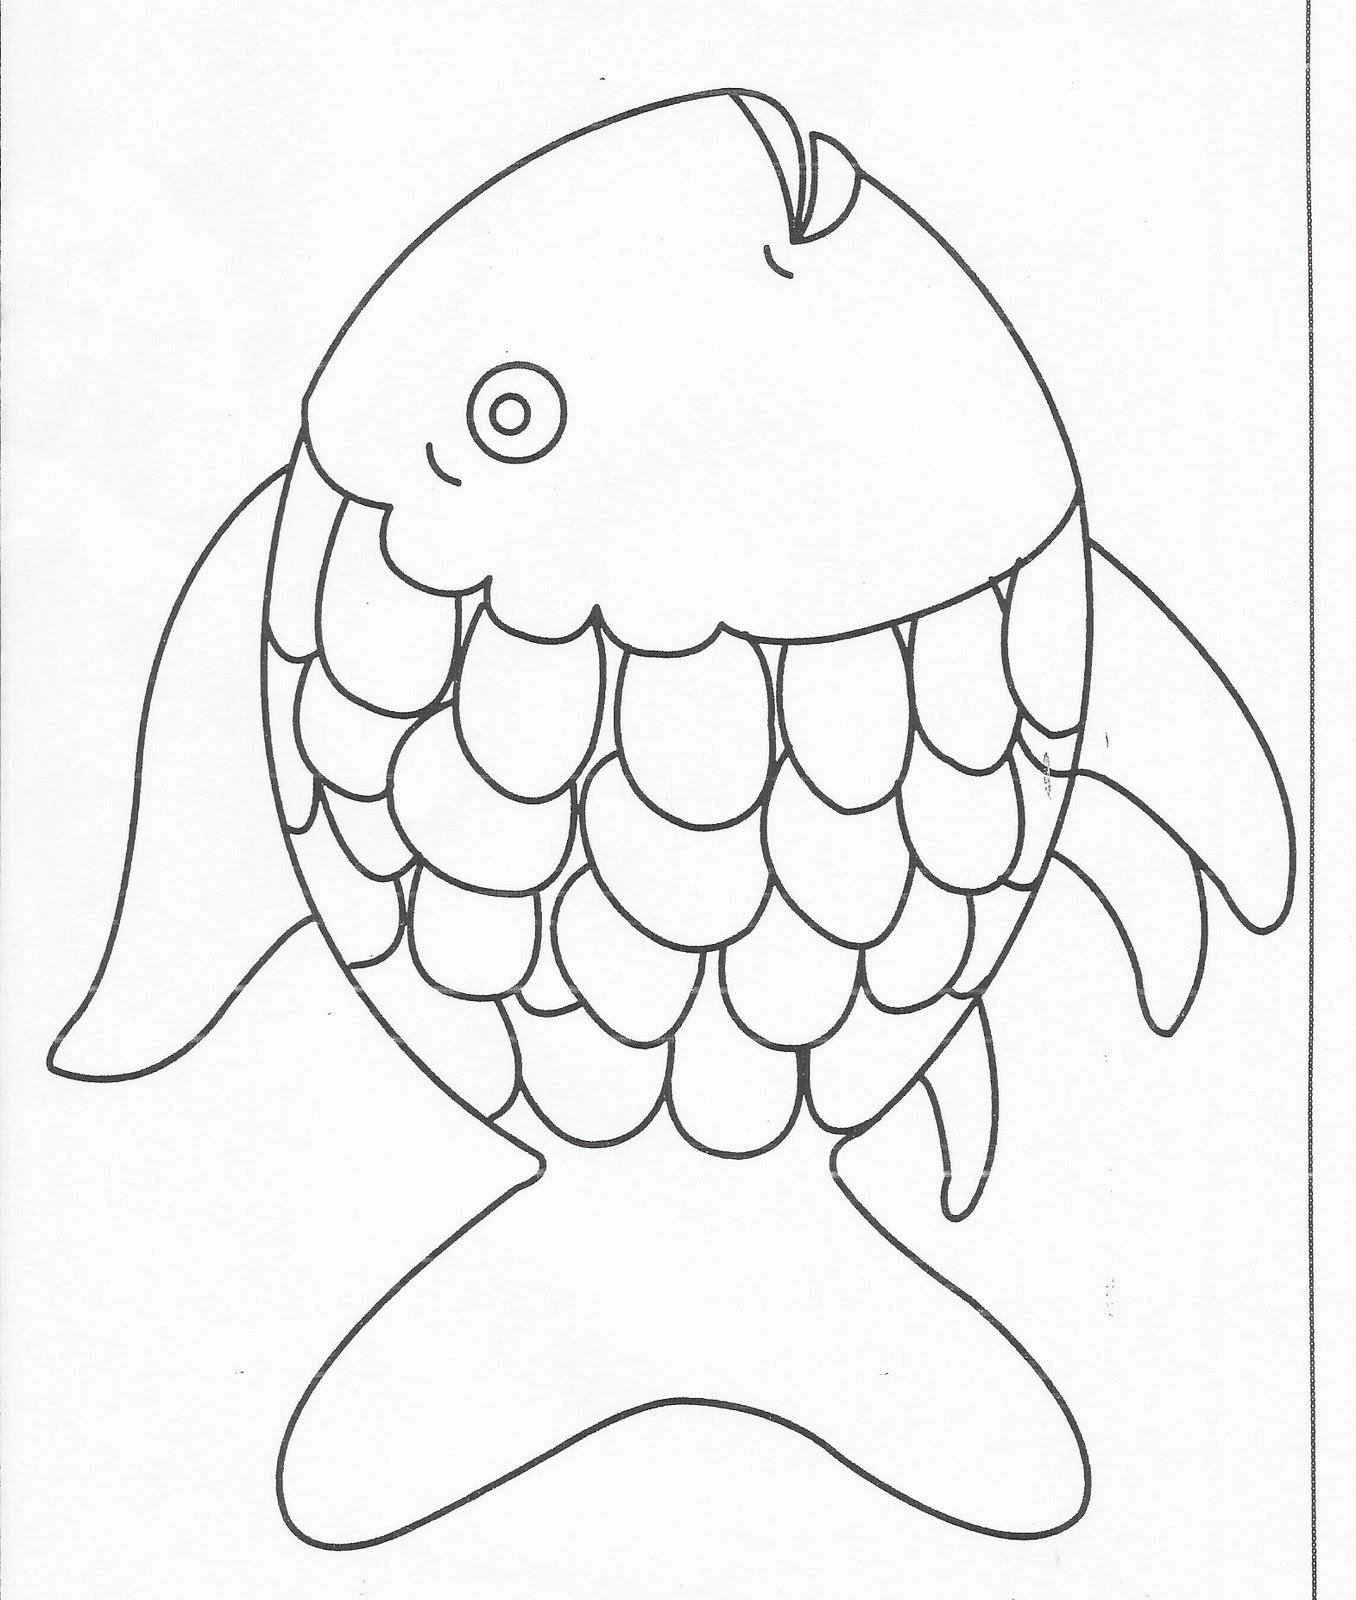 free-rainbow-fish-outline-download-free-rainbow-fish-outline-png